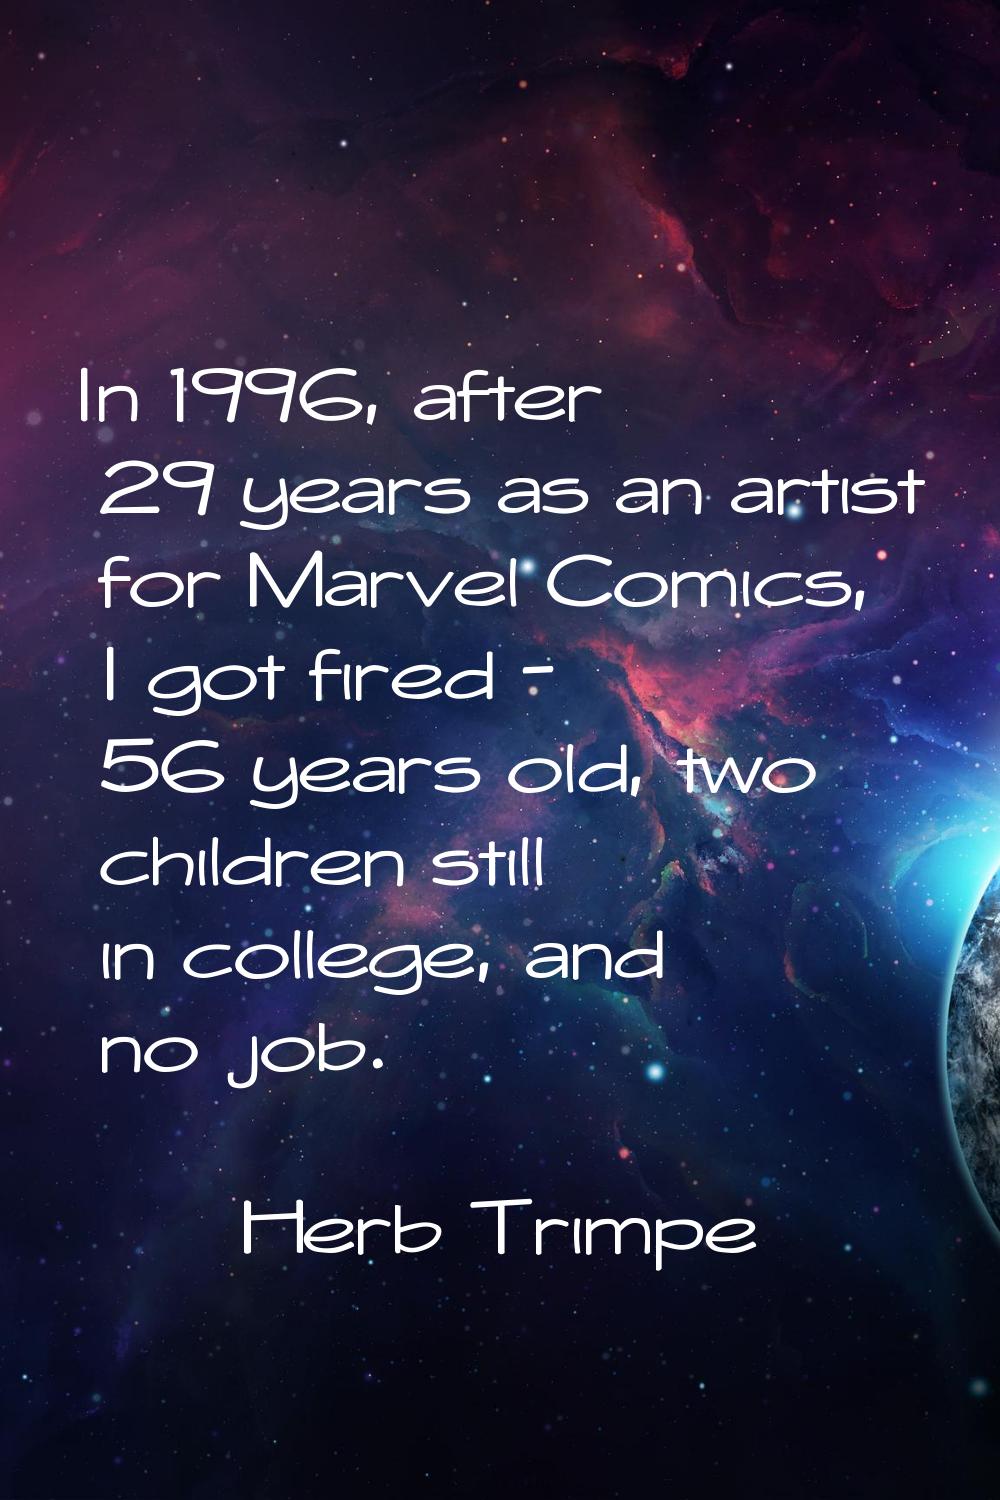 In 1996, after 29 years as an artist for Marvel Comics, I got fired - 56 years old, two children st